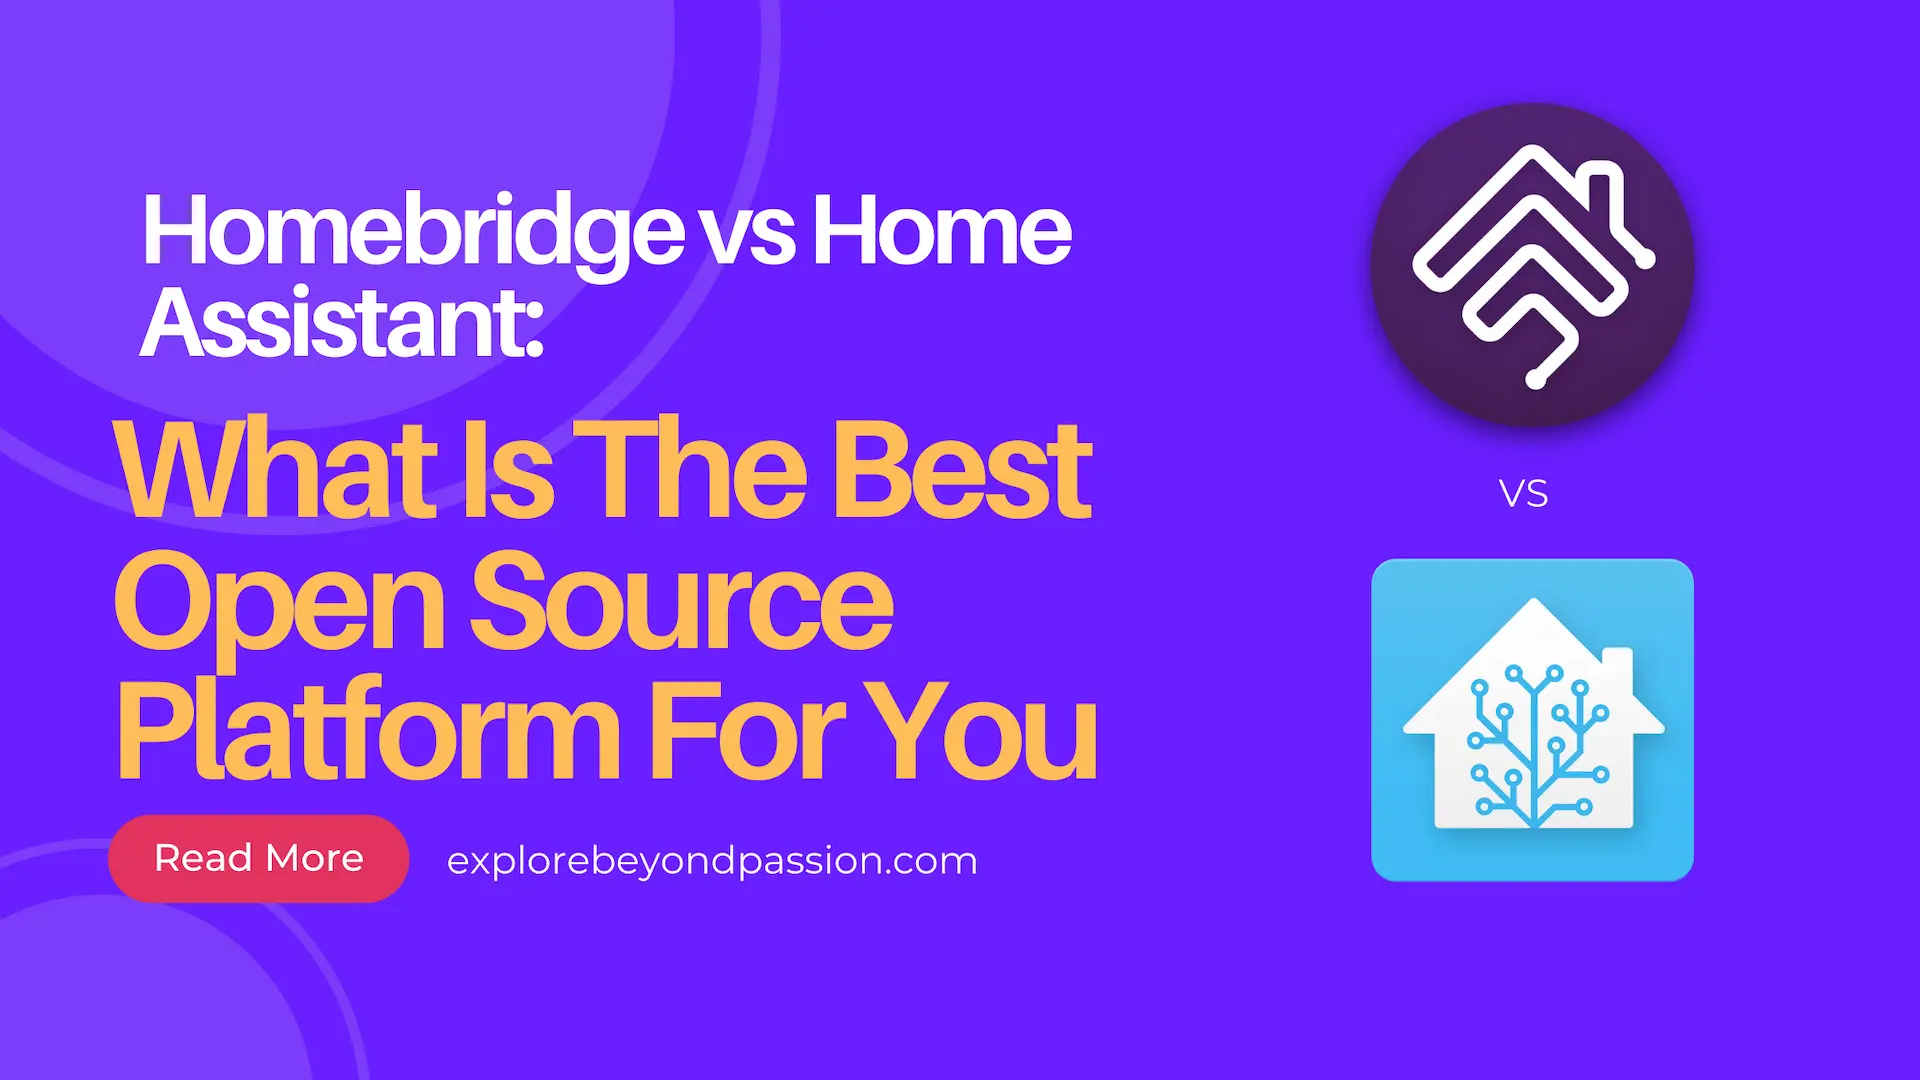 Homebridge vs Home Assistant What Is The Best Open Source Platform For You